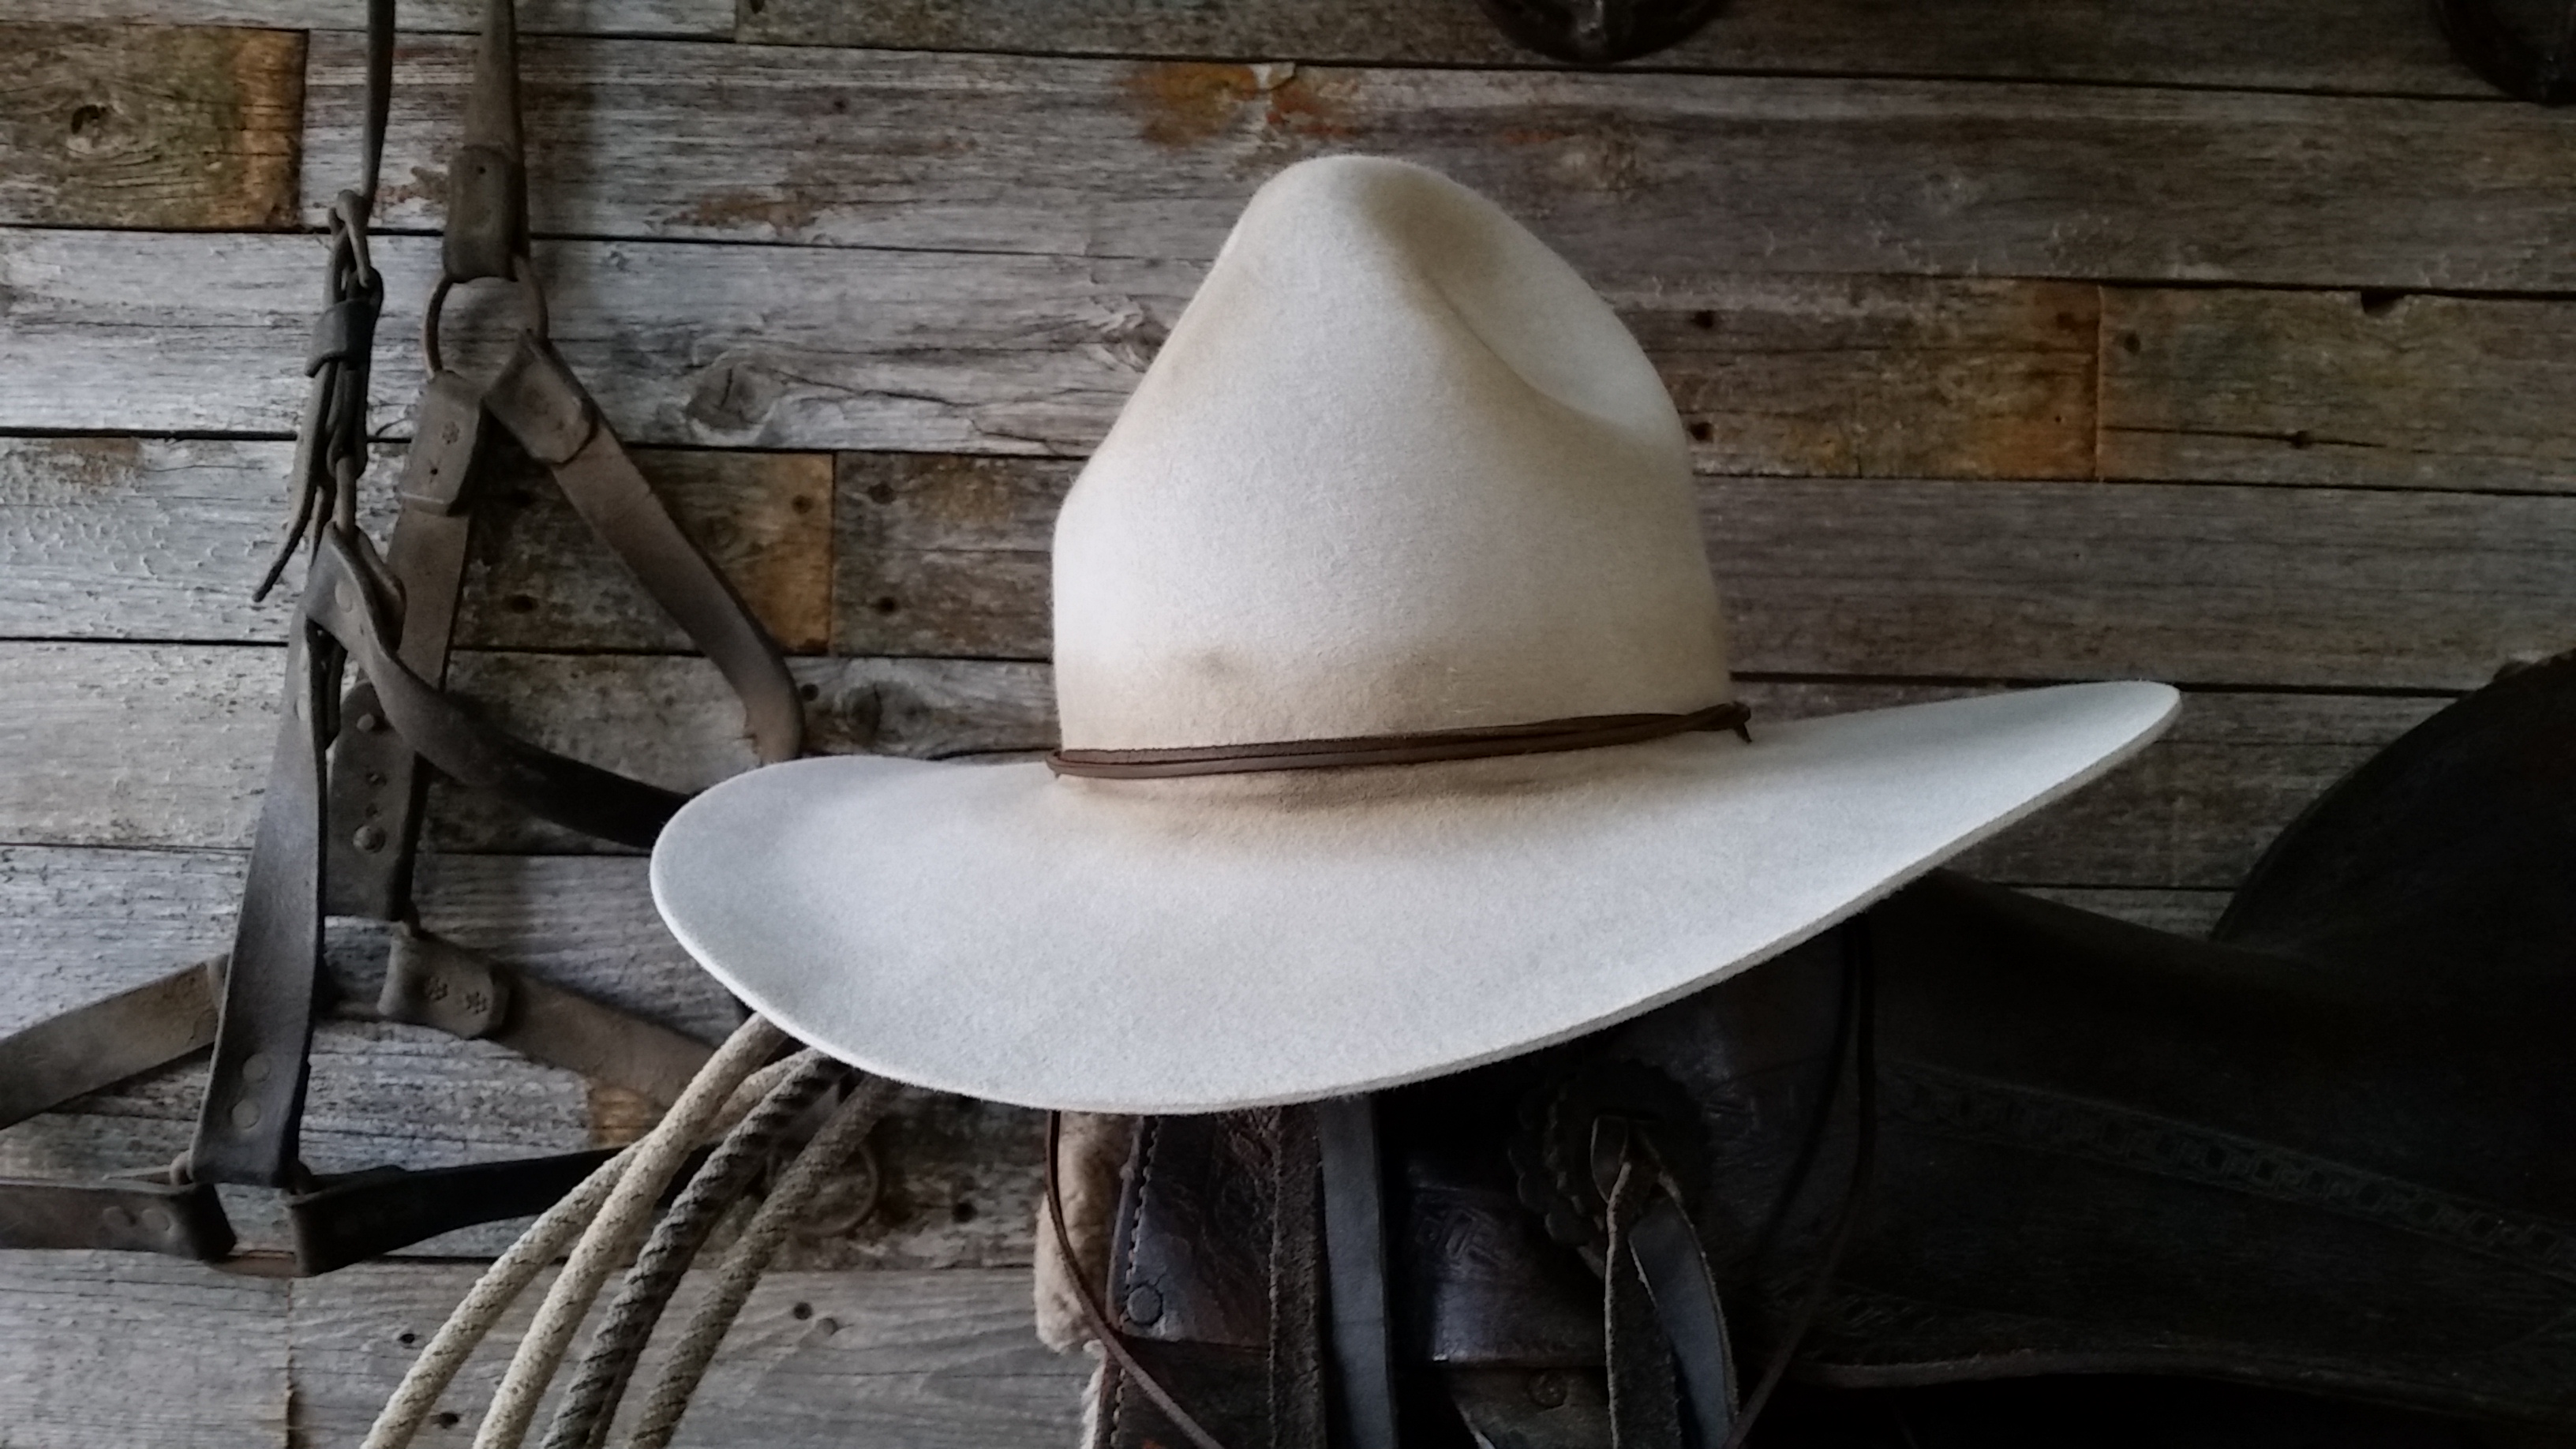 Old Western Cowboy Hats - Staker Hats